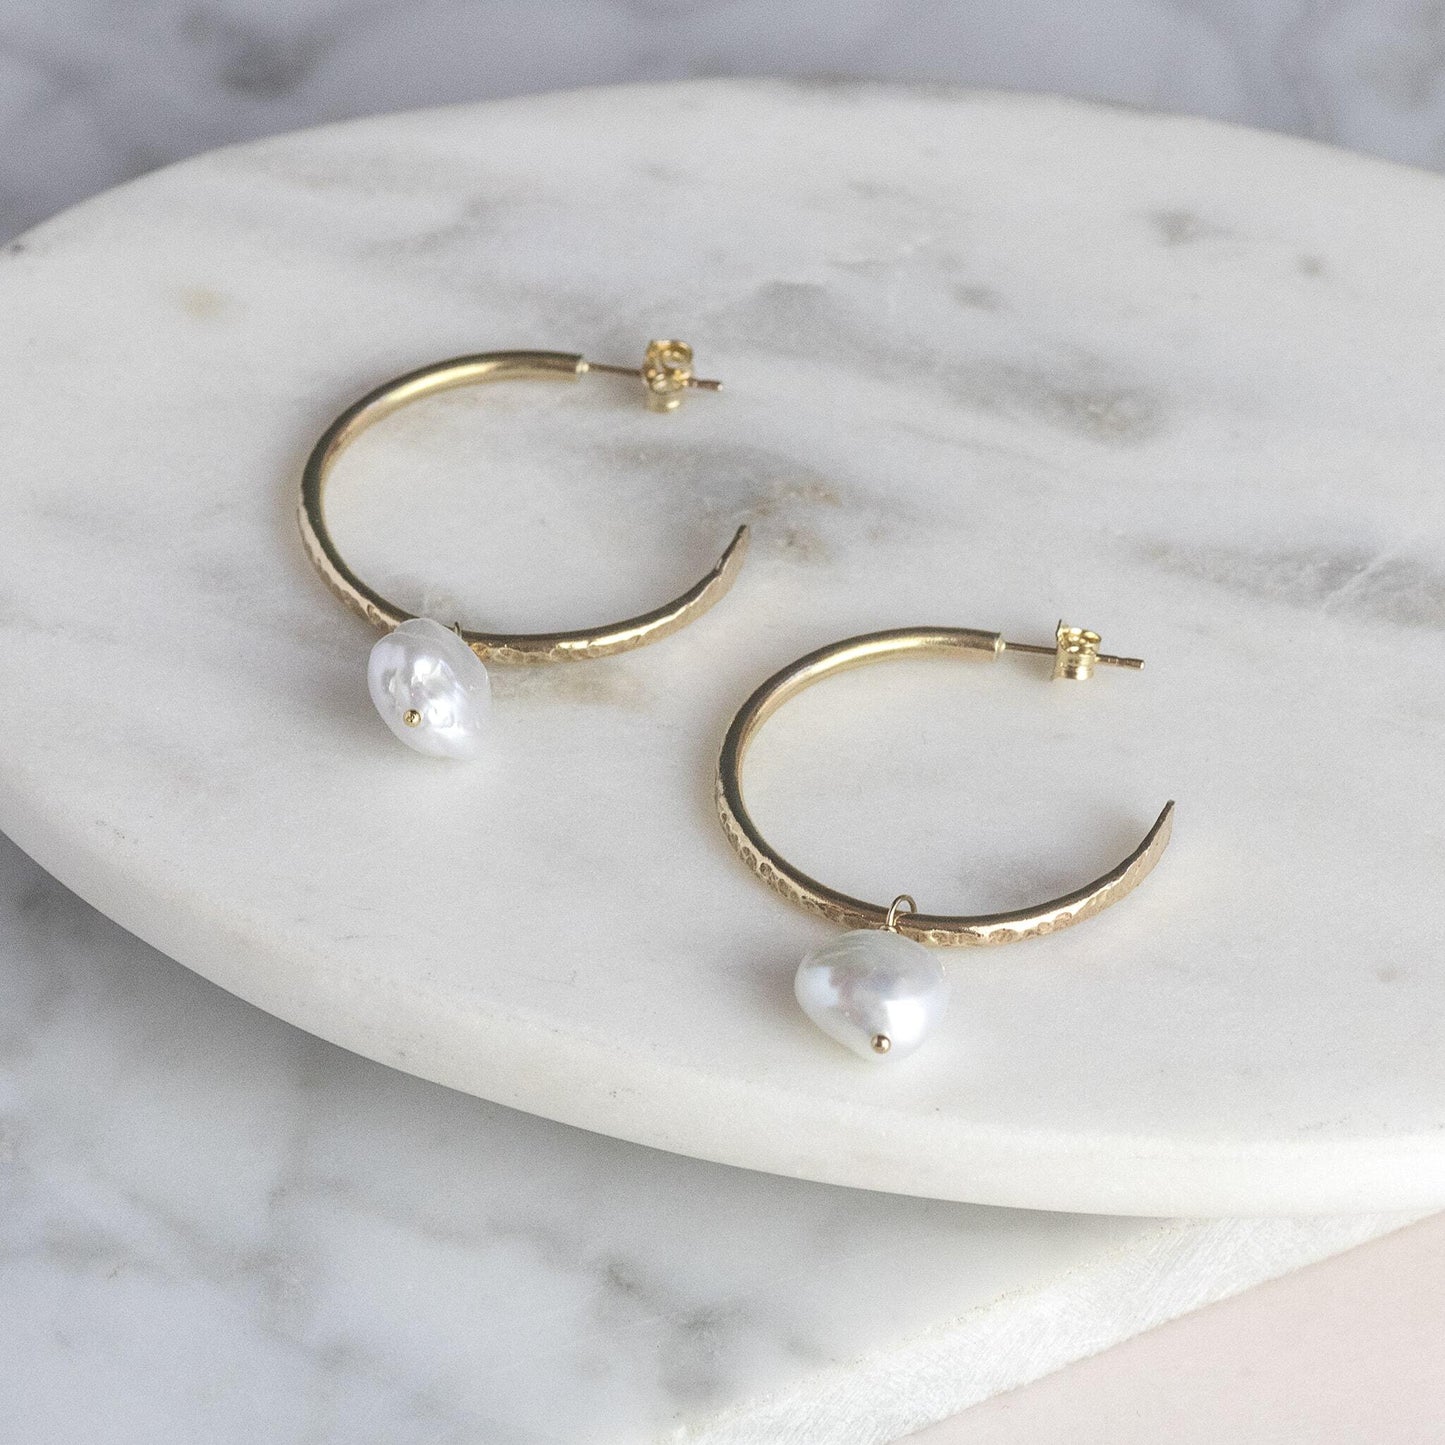 Small Gold Hoops with Pearls